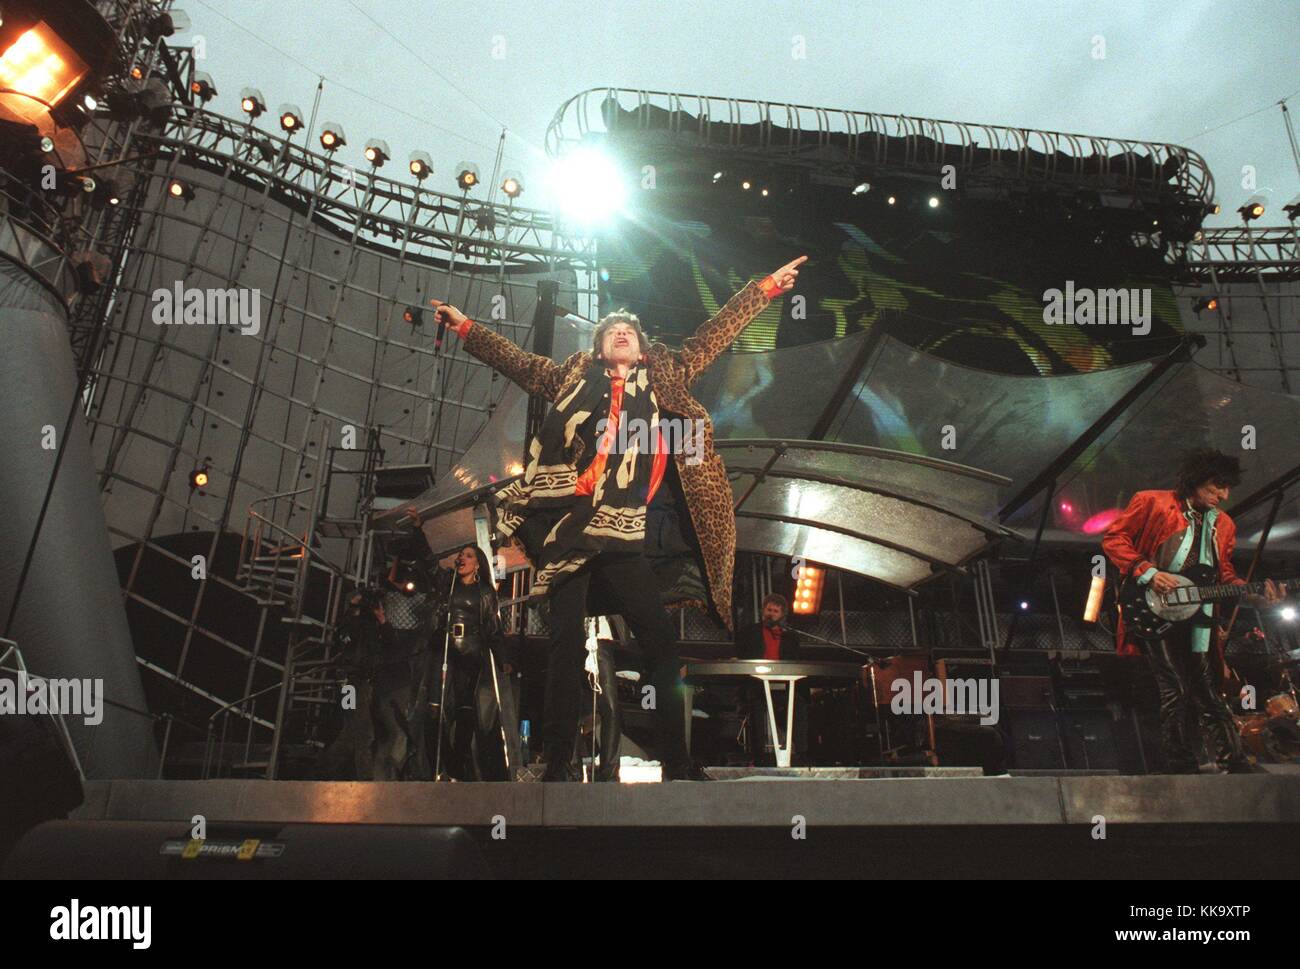 Rolling Stones" Boss Mick Jagger on stage on the occasion of their "Voodoo- Lounge-Tour", Niedersachsenstadion, Lower Saxony Stadium, Hanover, undated.  | usage worldwide Stock Photo - Alamy